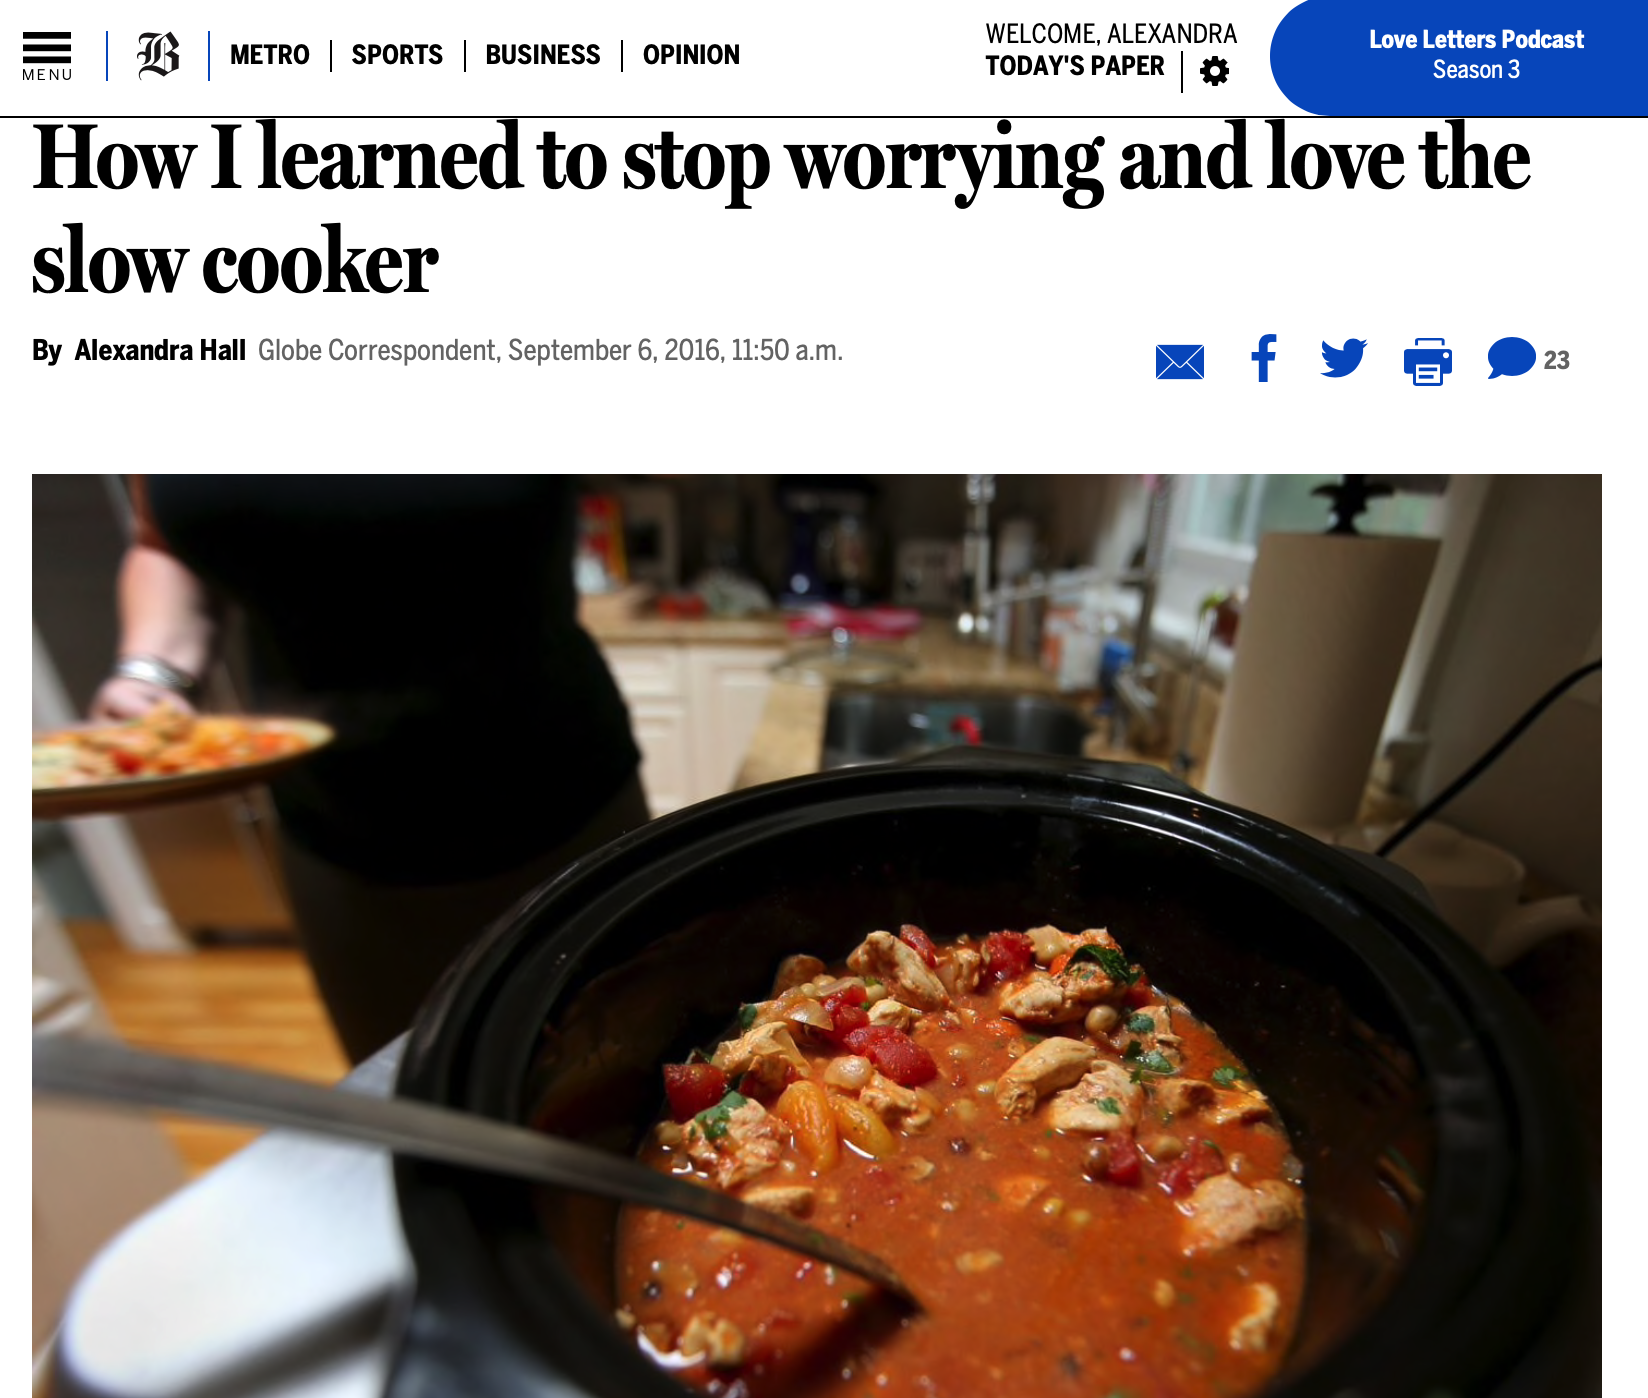 Slow Cooker story in The Boston Globe